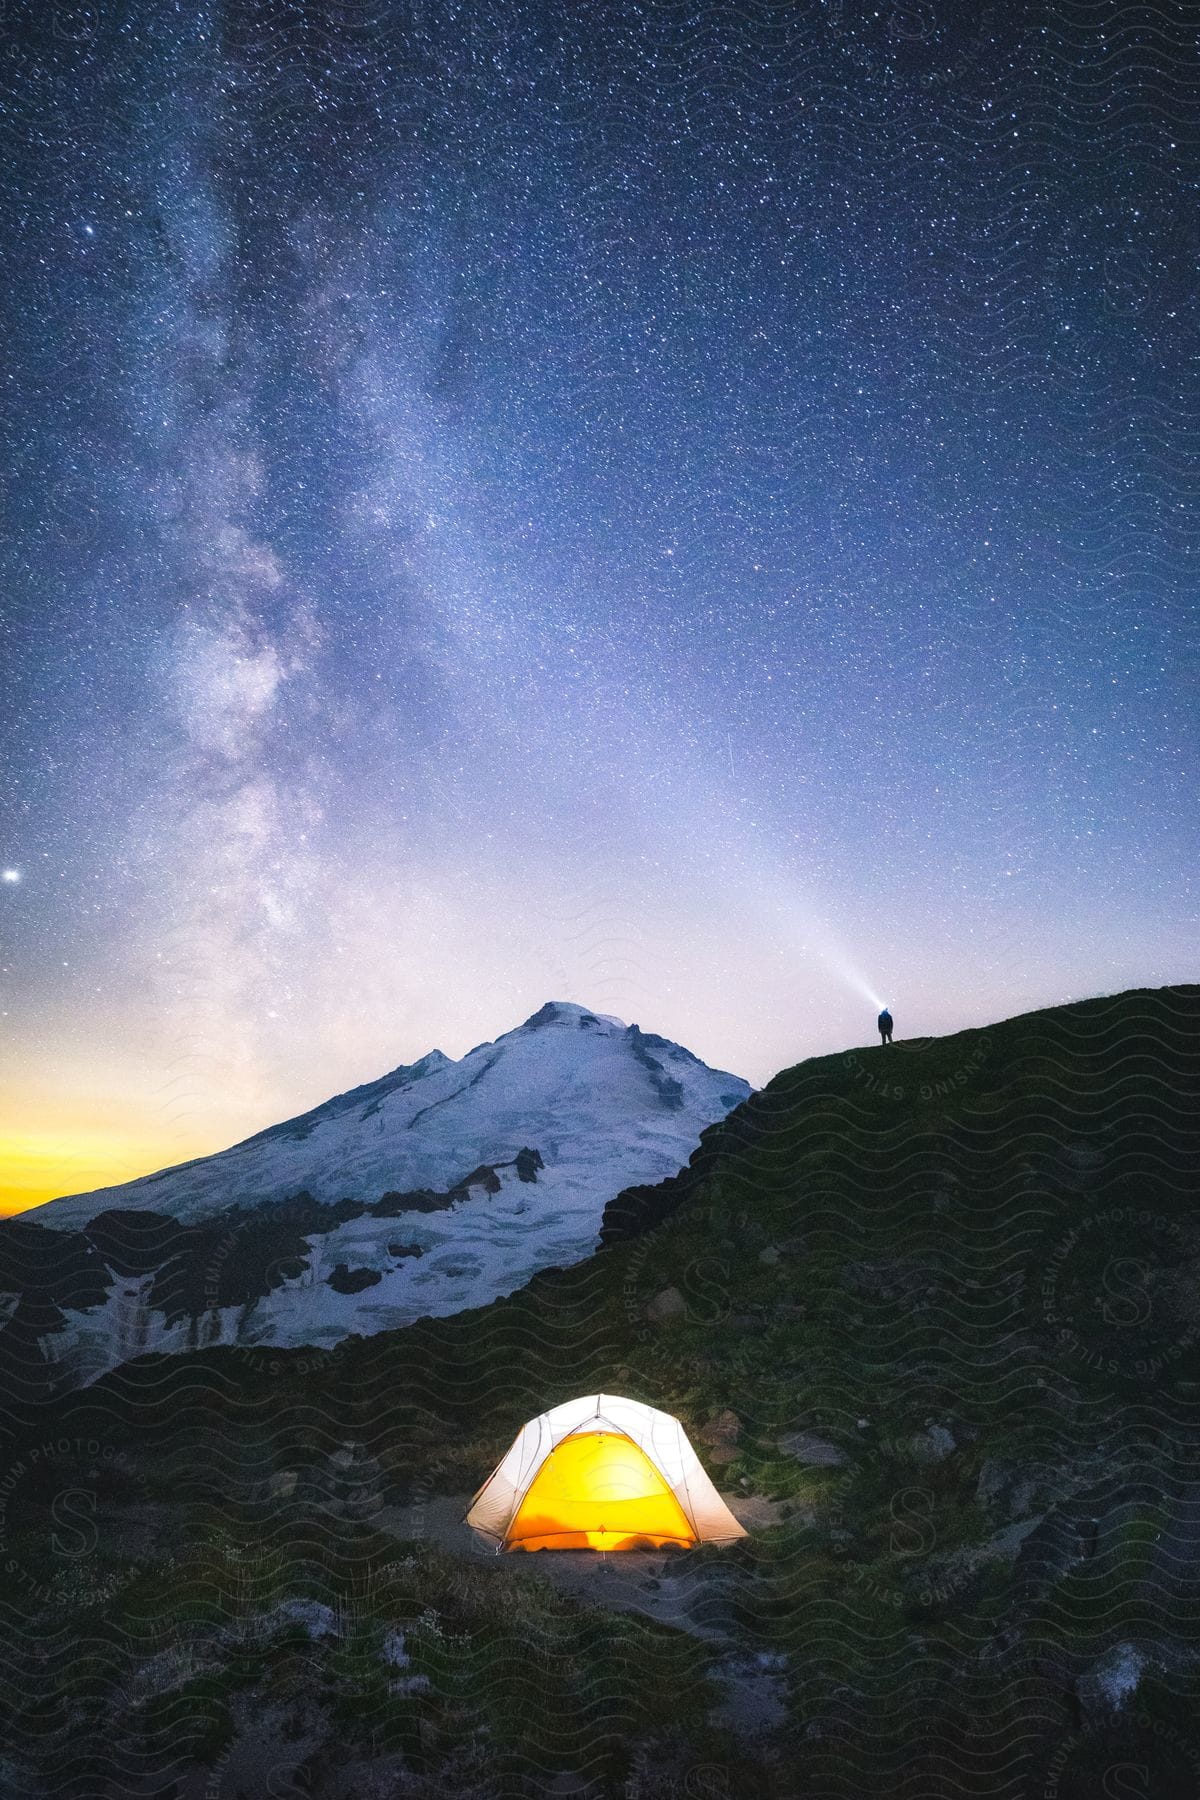 A person sets up a tent on top of a mountain at night, looking into the sky with a flashlight.